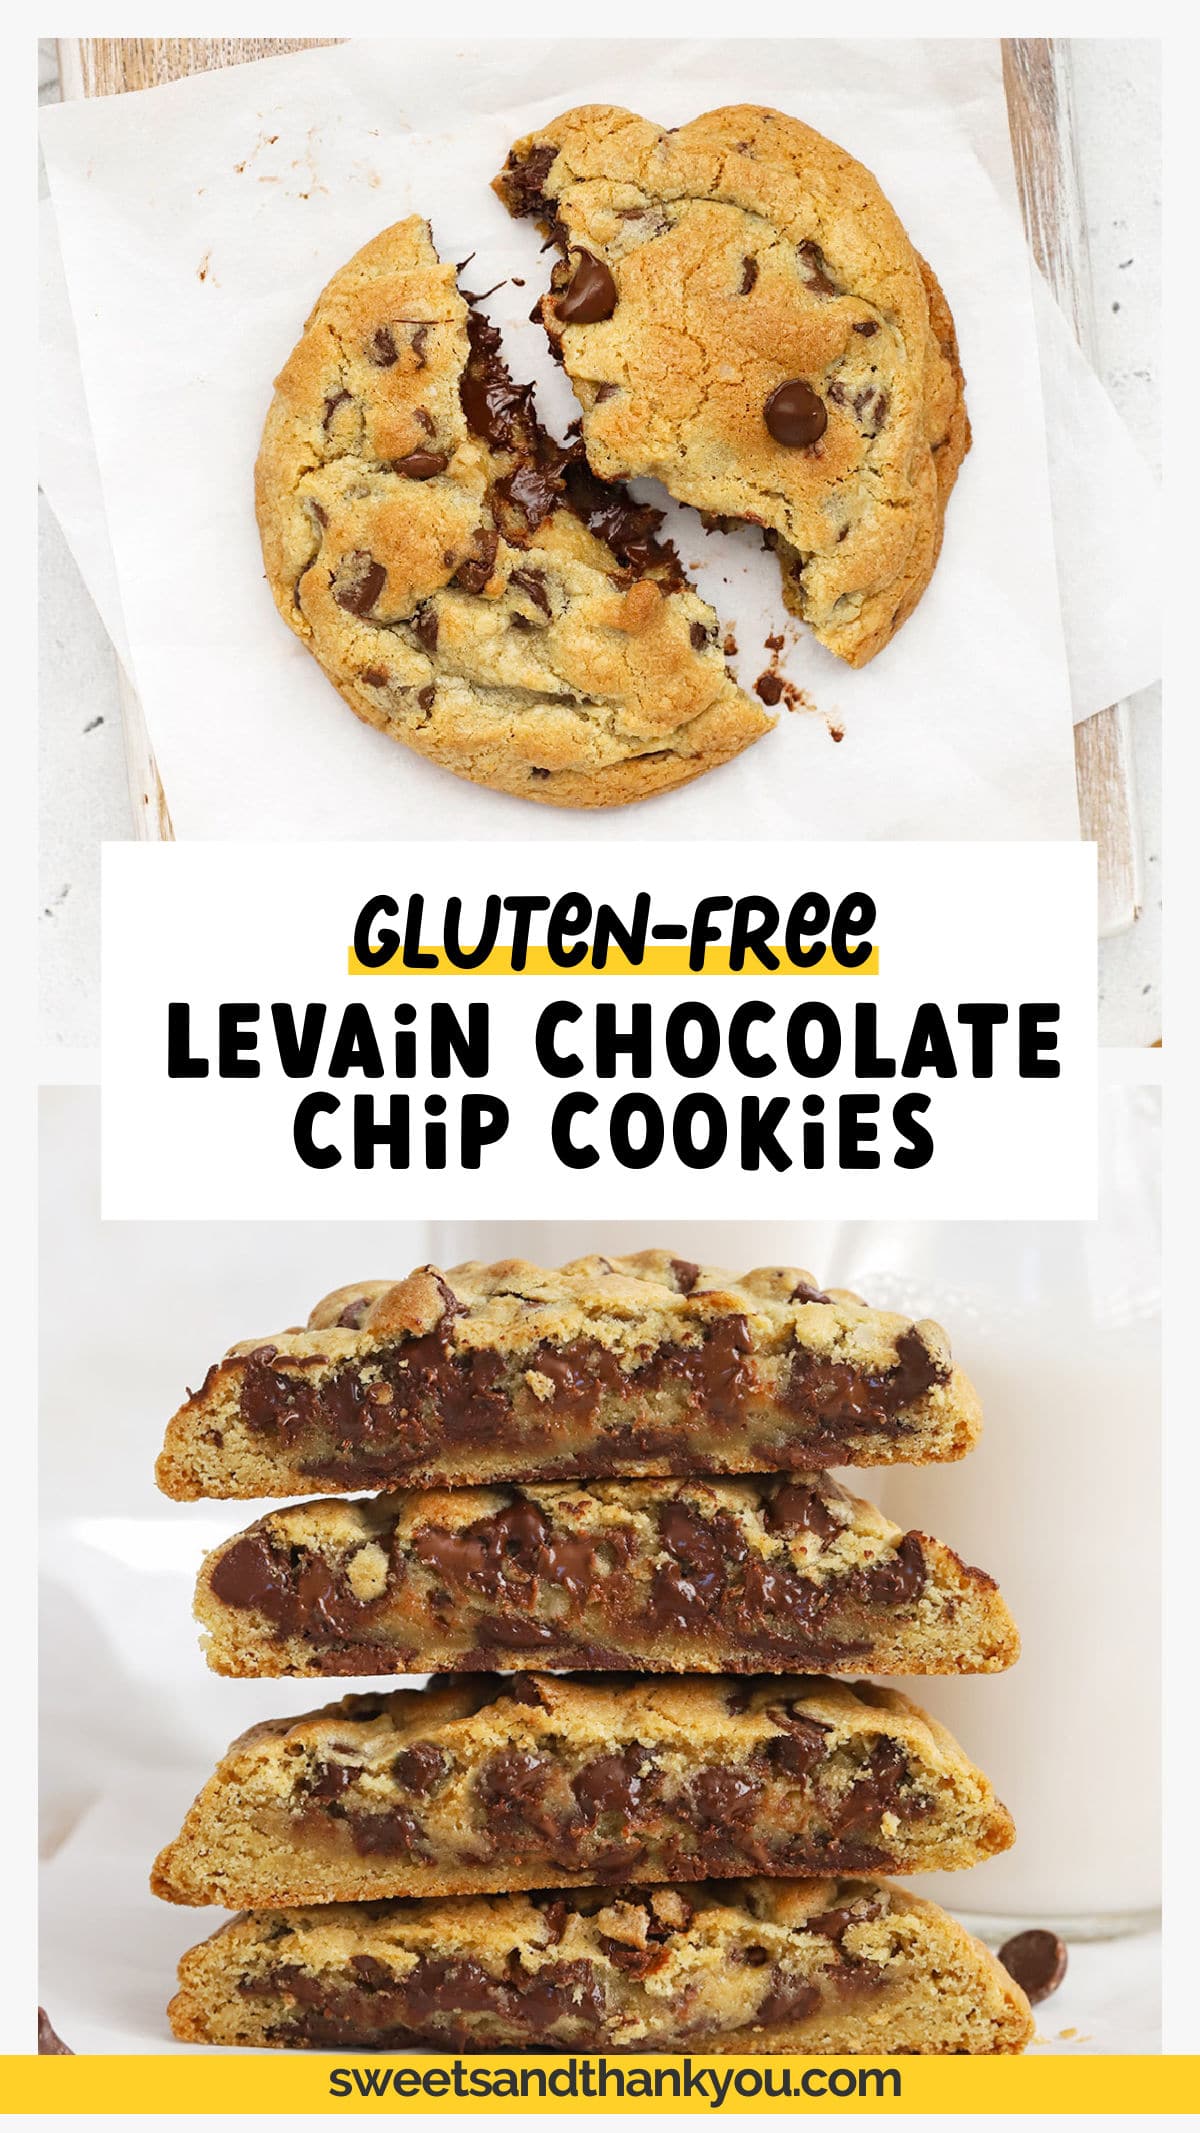 The BEST Gluten-Free Levain Chocolate Chip Cookies! Learn how to make Levain Bakery style thick gluten-free chocolate chip cookies at home with this easy recipe. These bakery-style gluten-free chocolate chip cookies are golden brown and delicately crisp on the outside and soft and gooey on the inside. They're the perfect cookie for chocolate lovers! Get our Levain copycat gluten-free chocolate chip cookies recipe & tips for perfect bakery-style cookies at Sweets & Thank You!